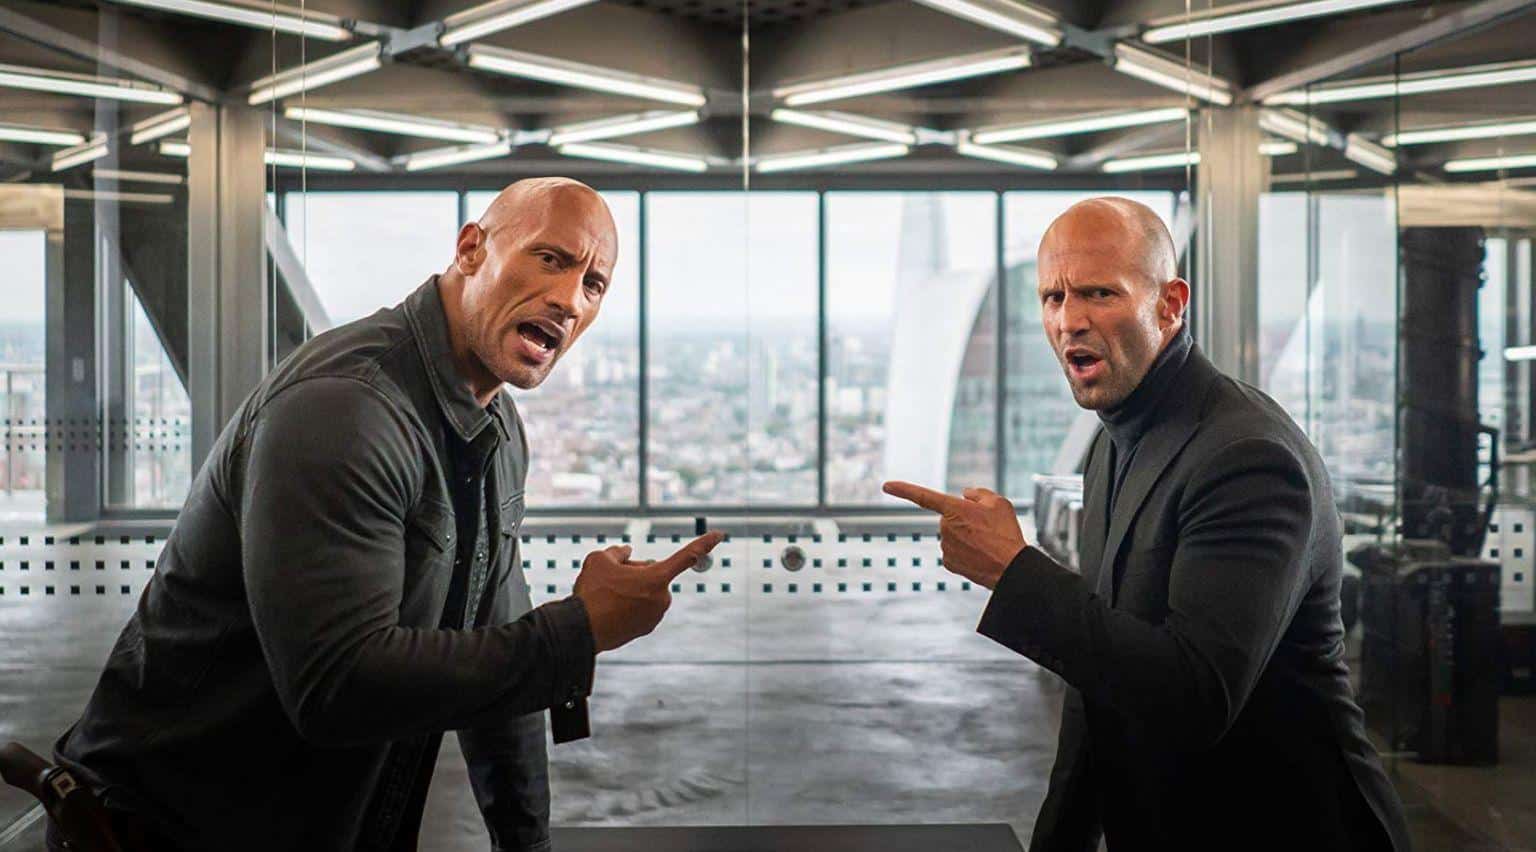 Fast and Furious - Hobbs and Shaw